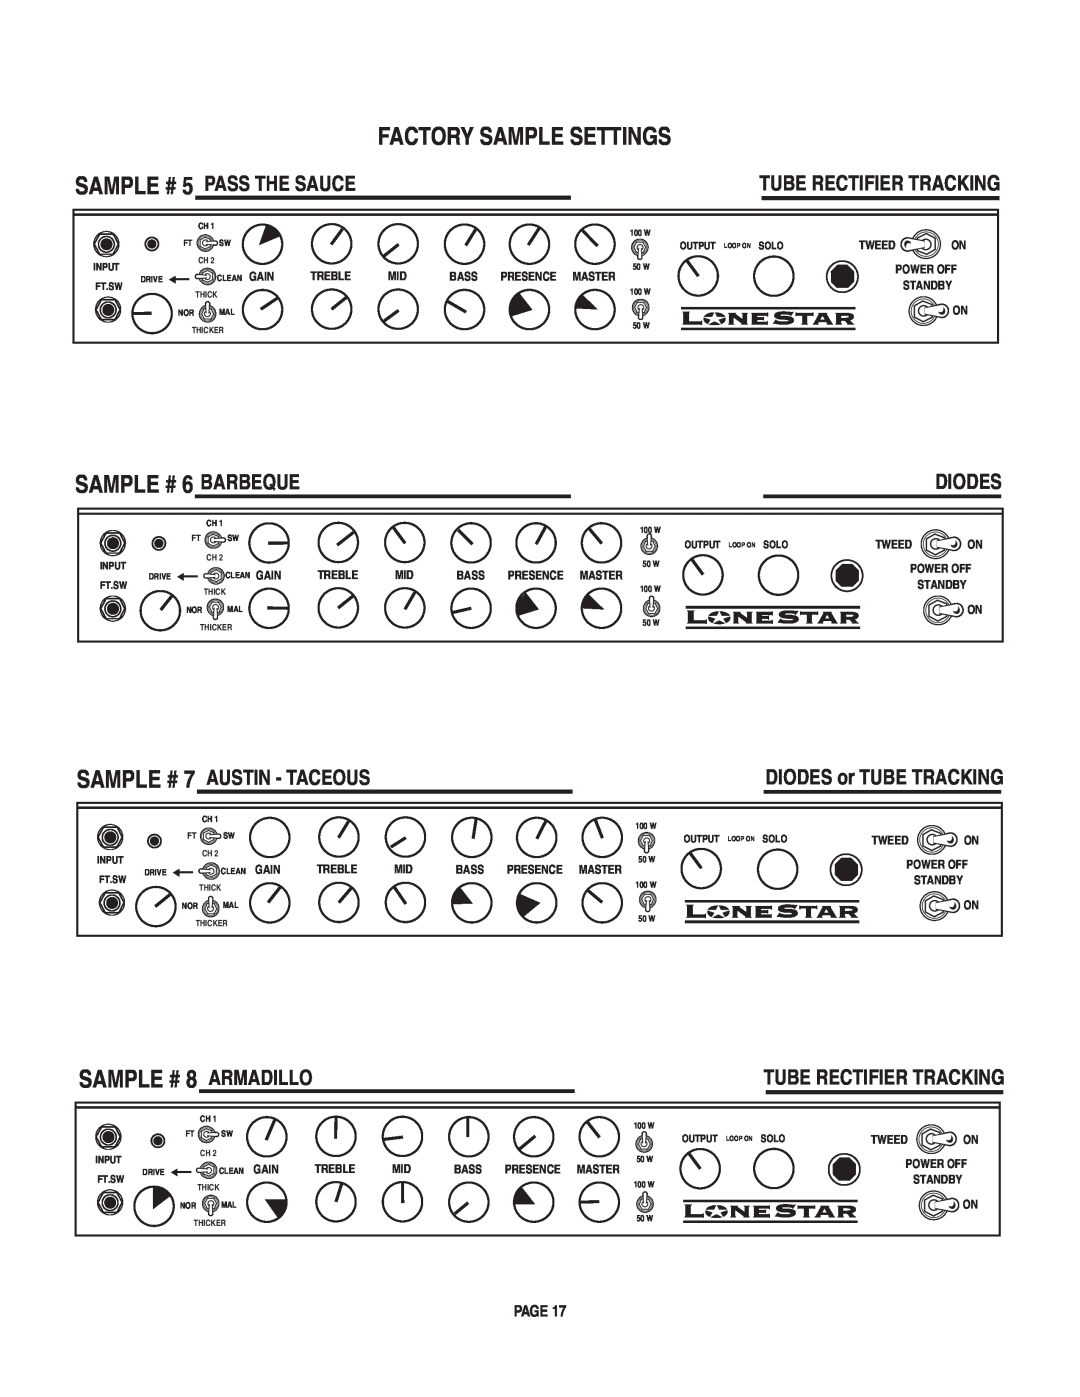 Mesa/Boogie LoneStar Amplifier owner manual SAMPLE # 6 BARBEQUE, Factory Sample Settings, Tube Rectifier Tracking, Diodes 